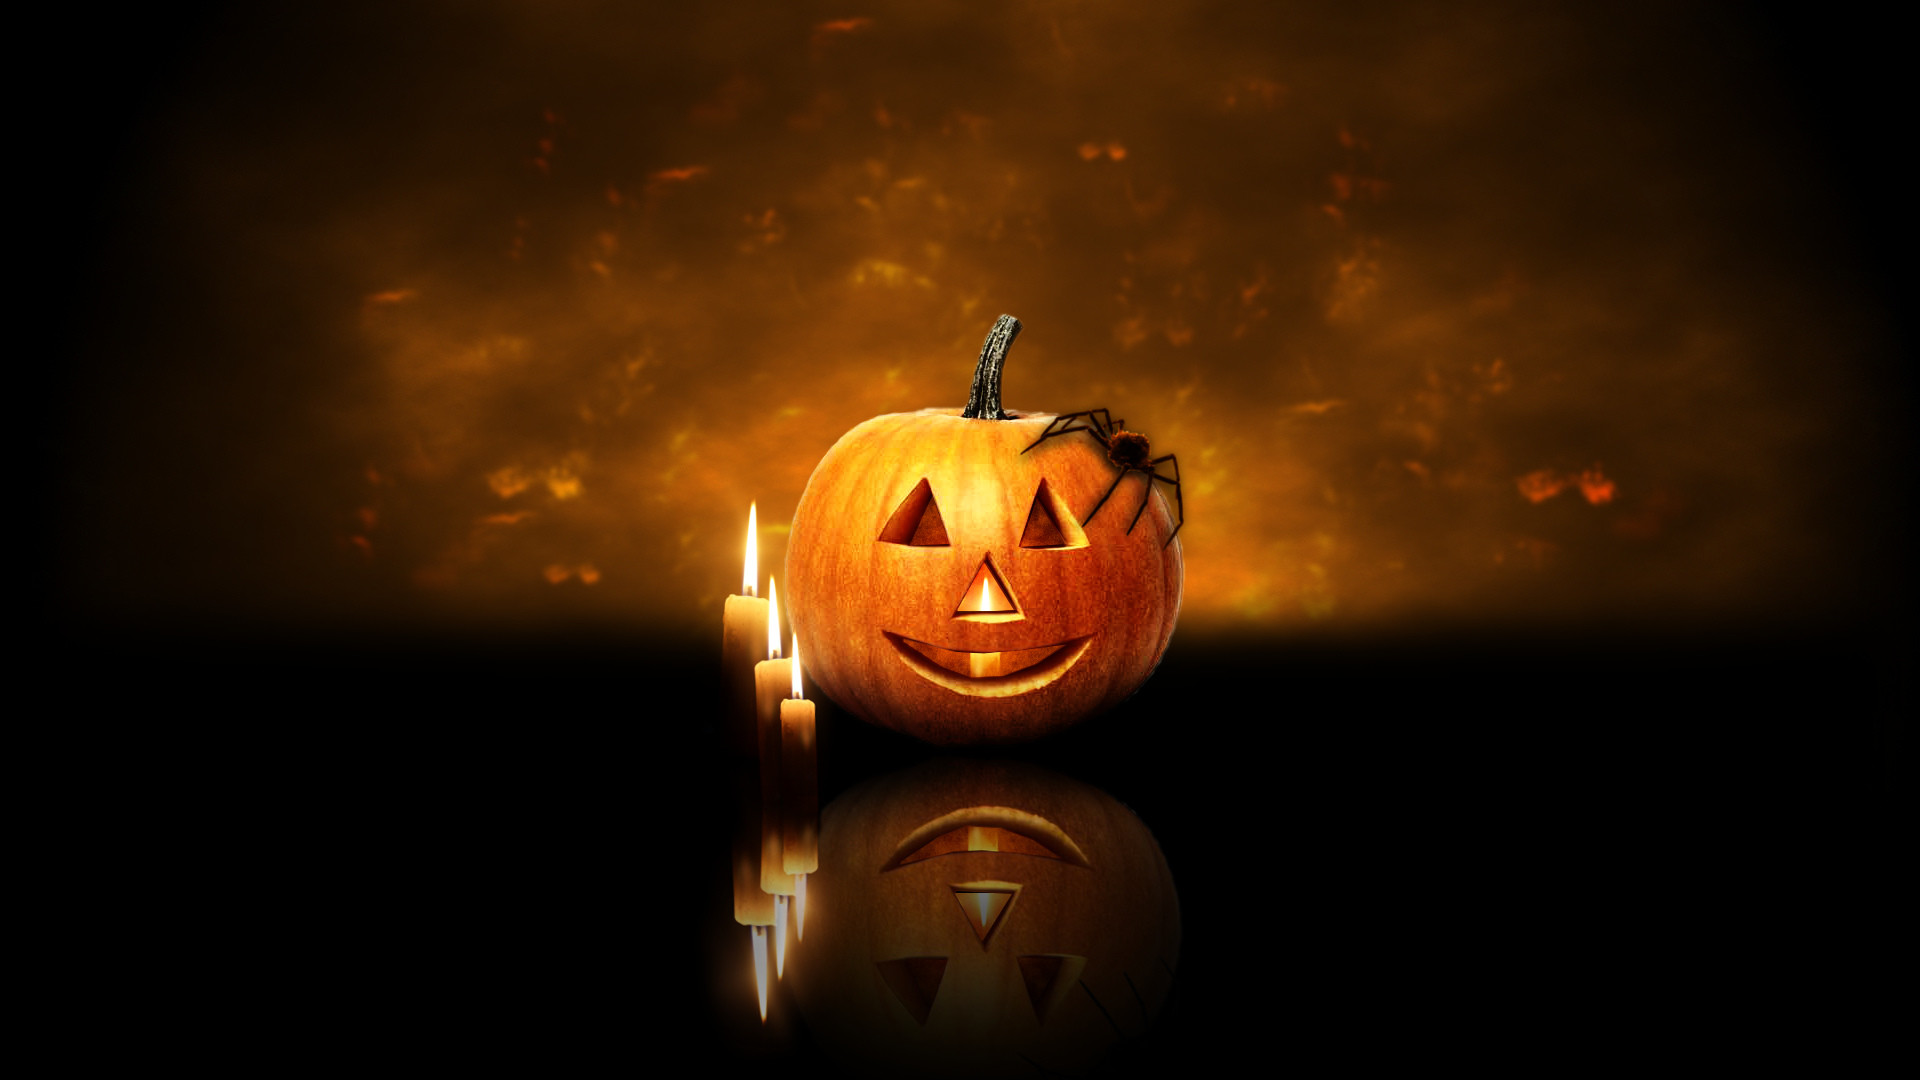 1920x1080 Scary Halloween 2012 HD Wallpapers | Pumpkins, Witches, Spider Web .